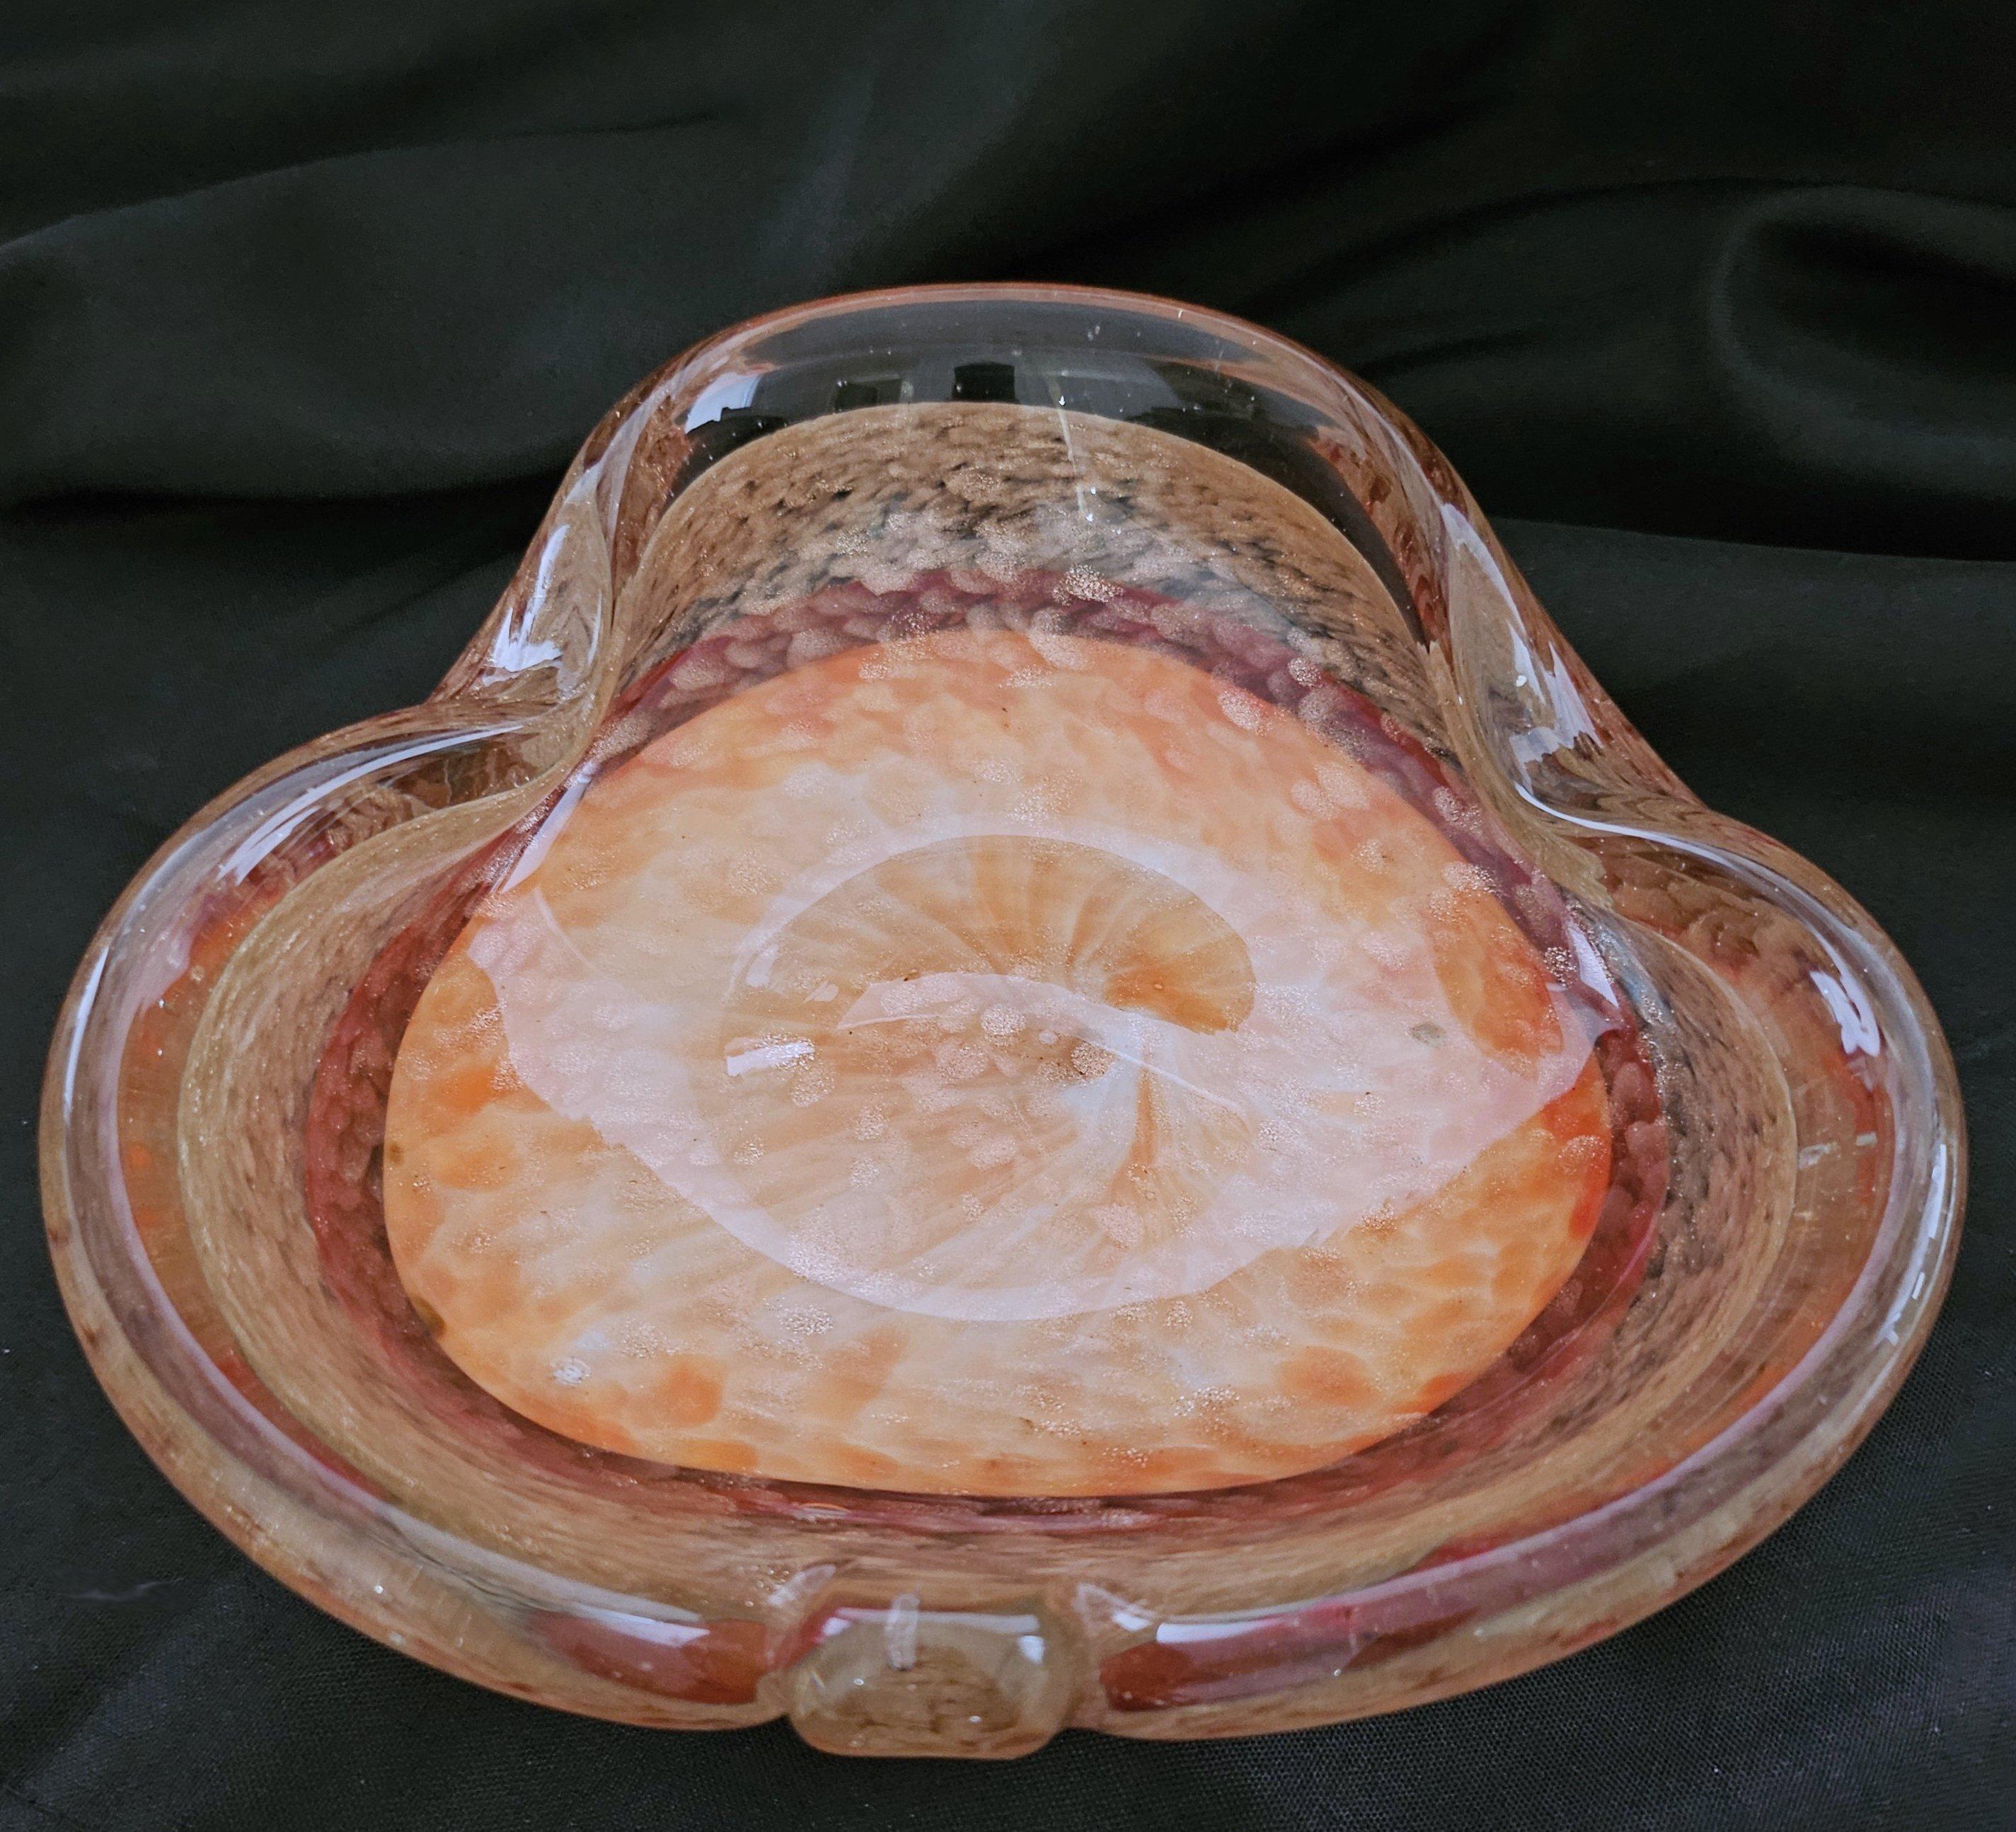 Vintage Murano Glass Dish / Bowl with Gold Fleck or Aventurine
A lovely work of Murano glass artistry in good vintage condition.
7.5 x 7 x 3 inches (apx)
Please note that the colors seem to look notably brighter/more saturated in the photos here